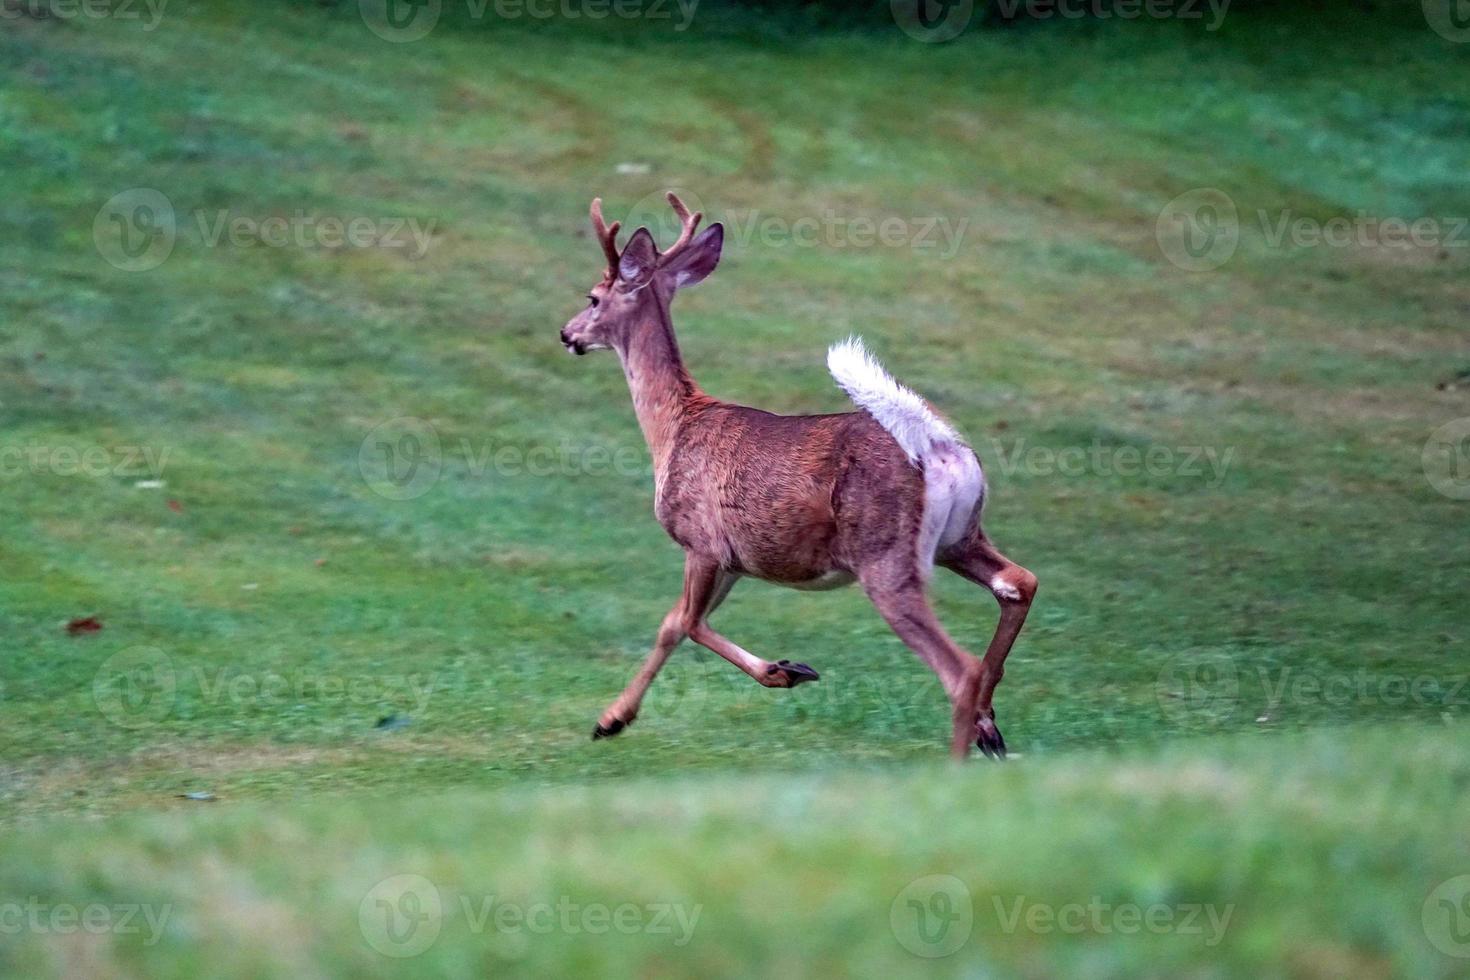 white tail deer running near the houses in new york state county countryside photo